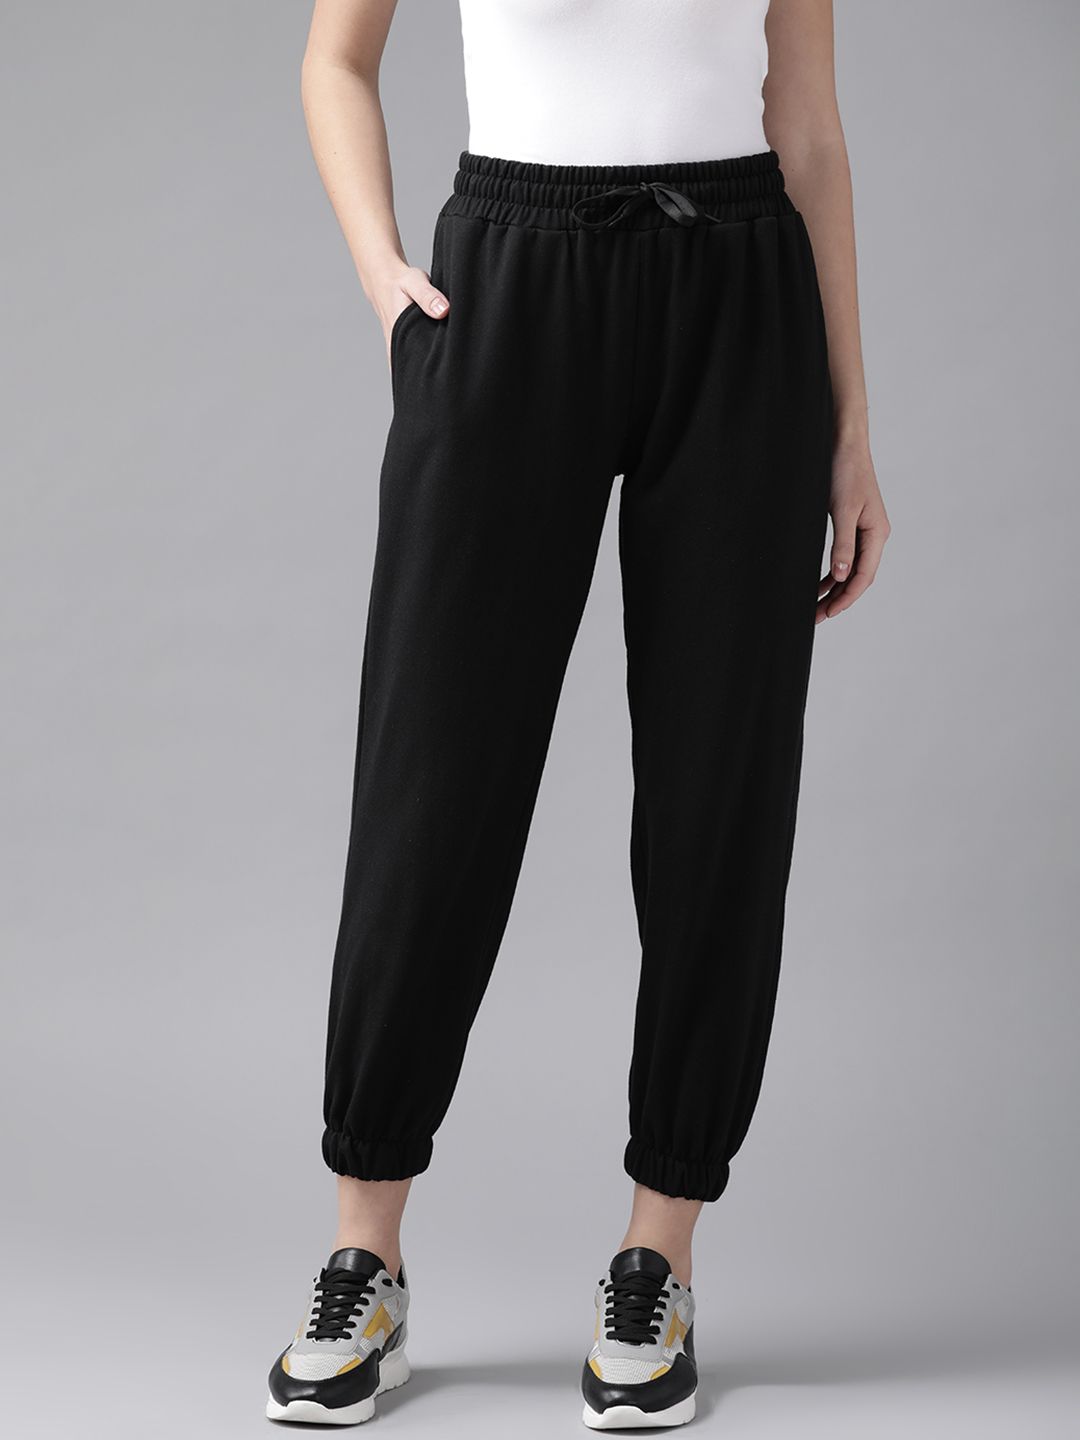 Roadster Women Black Solid Joggers Price in India